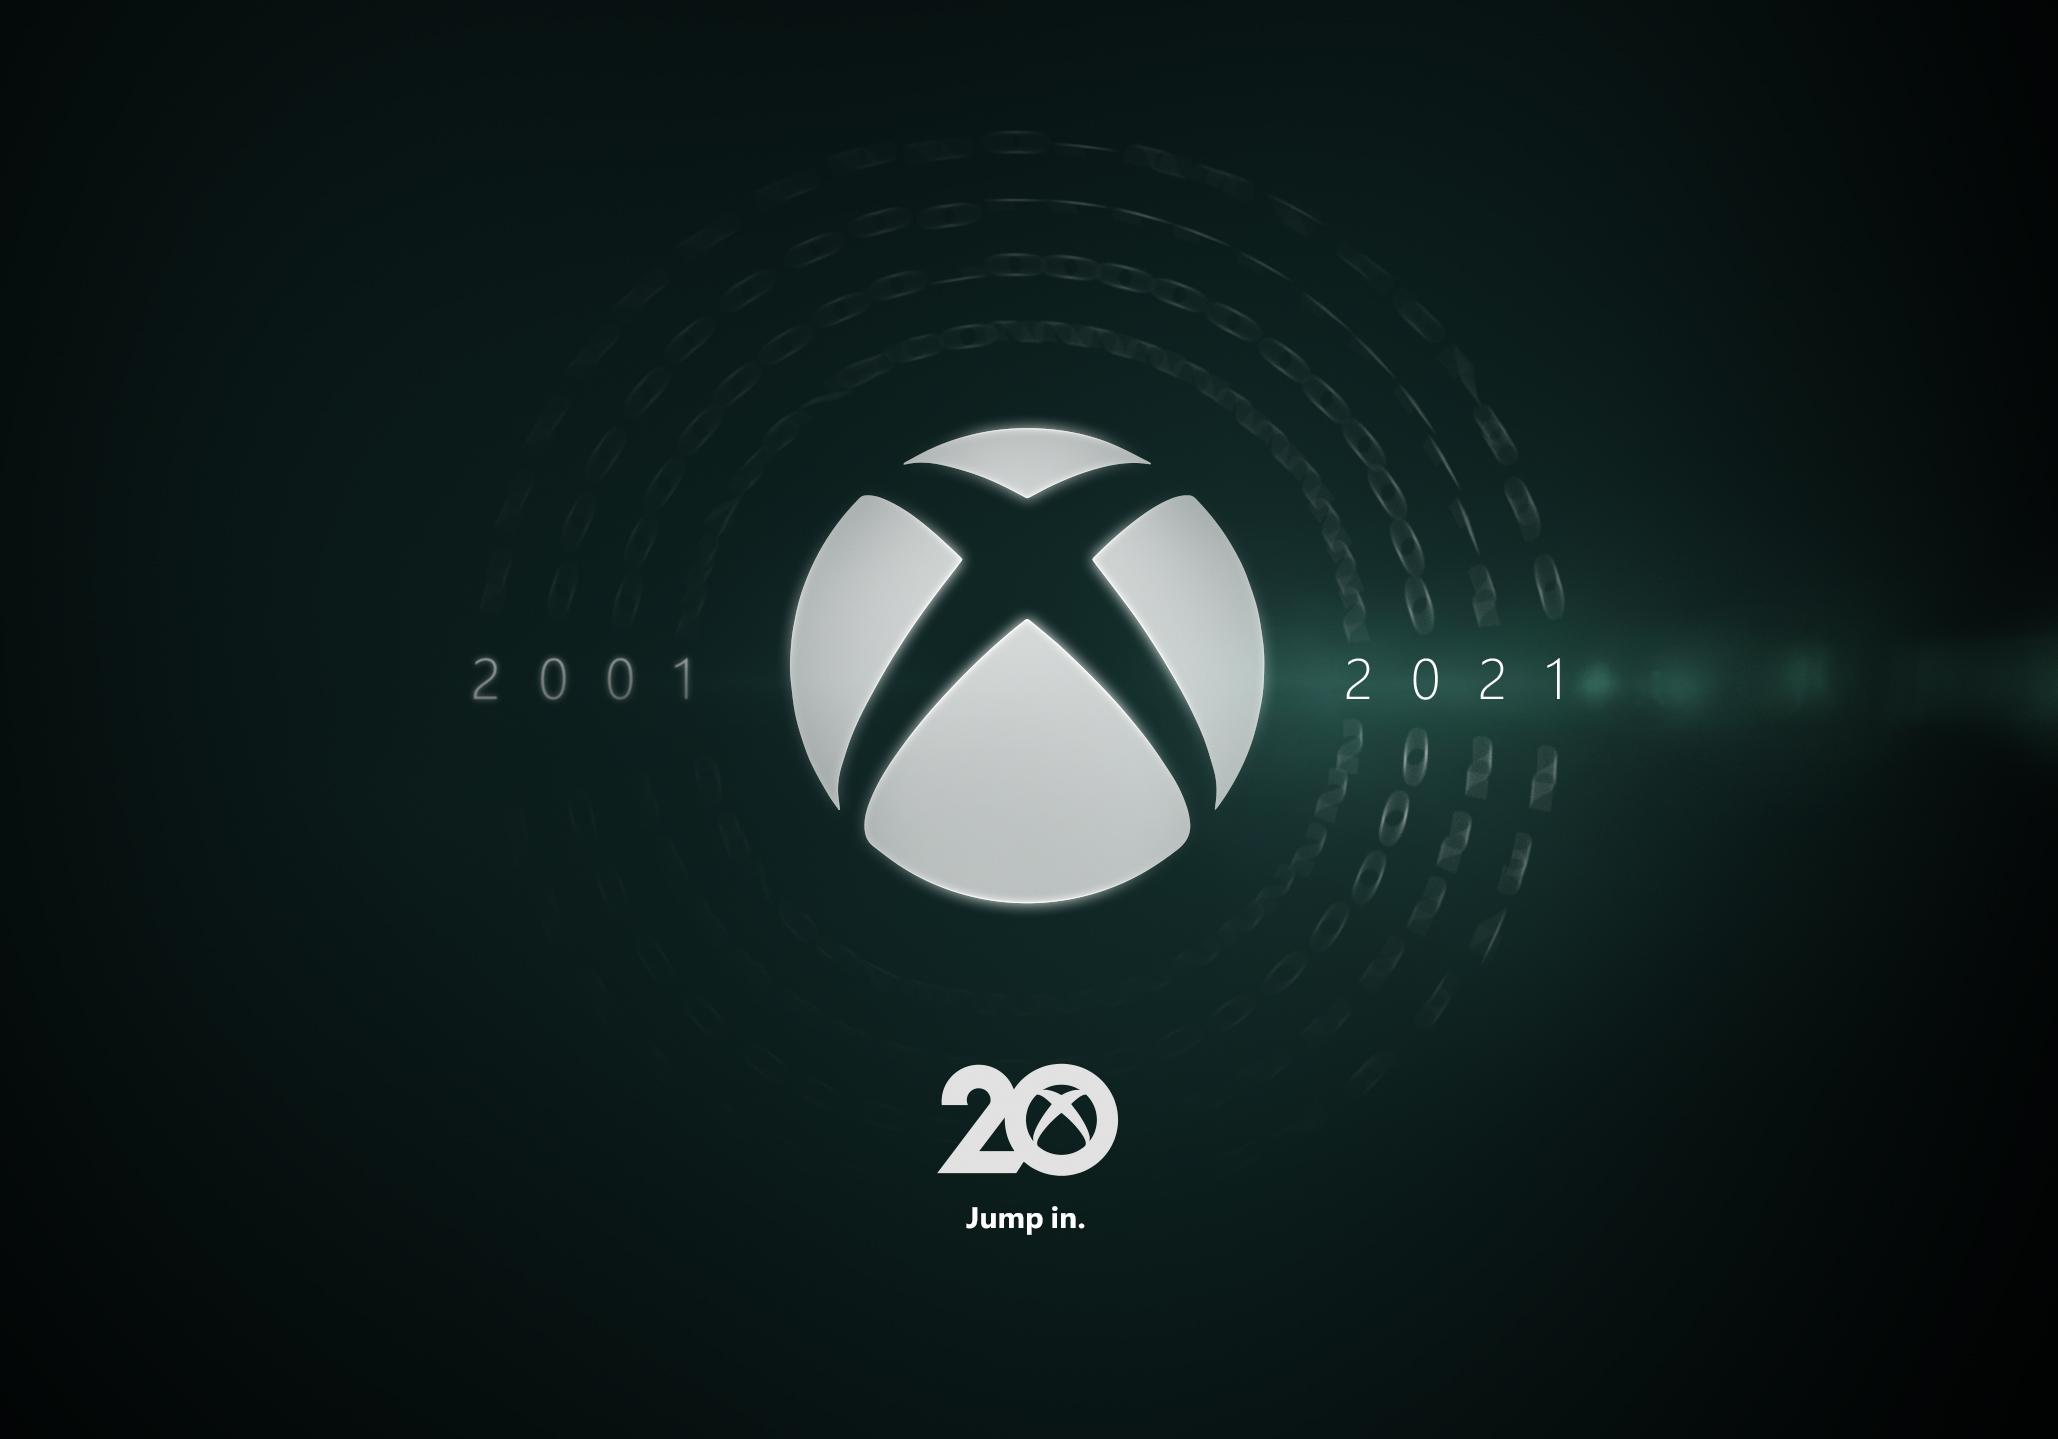 Xbox Wallpapers on